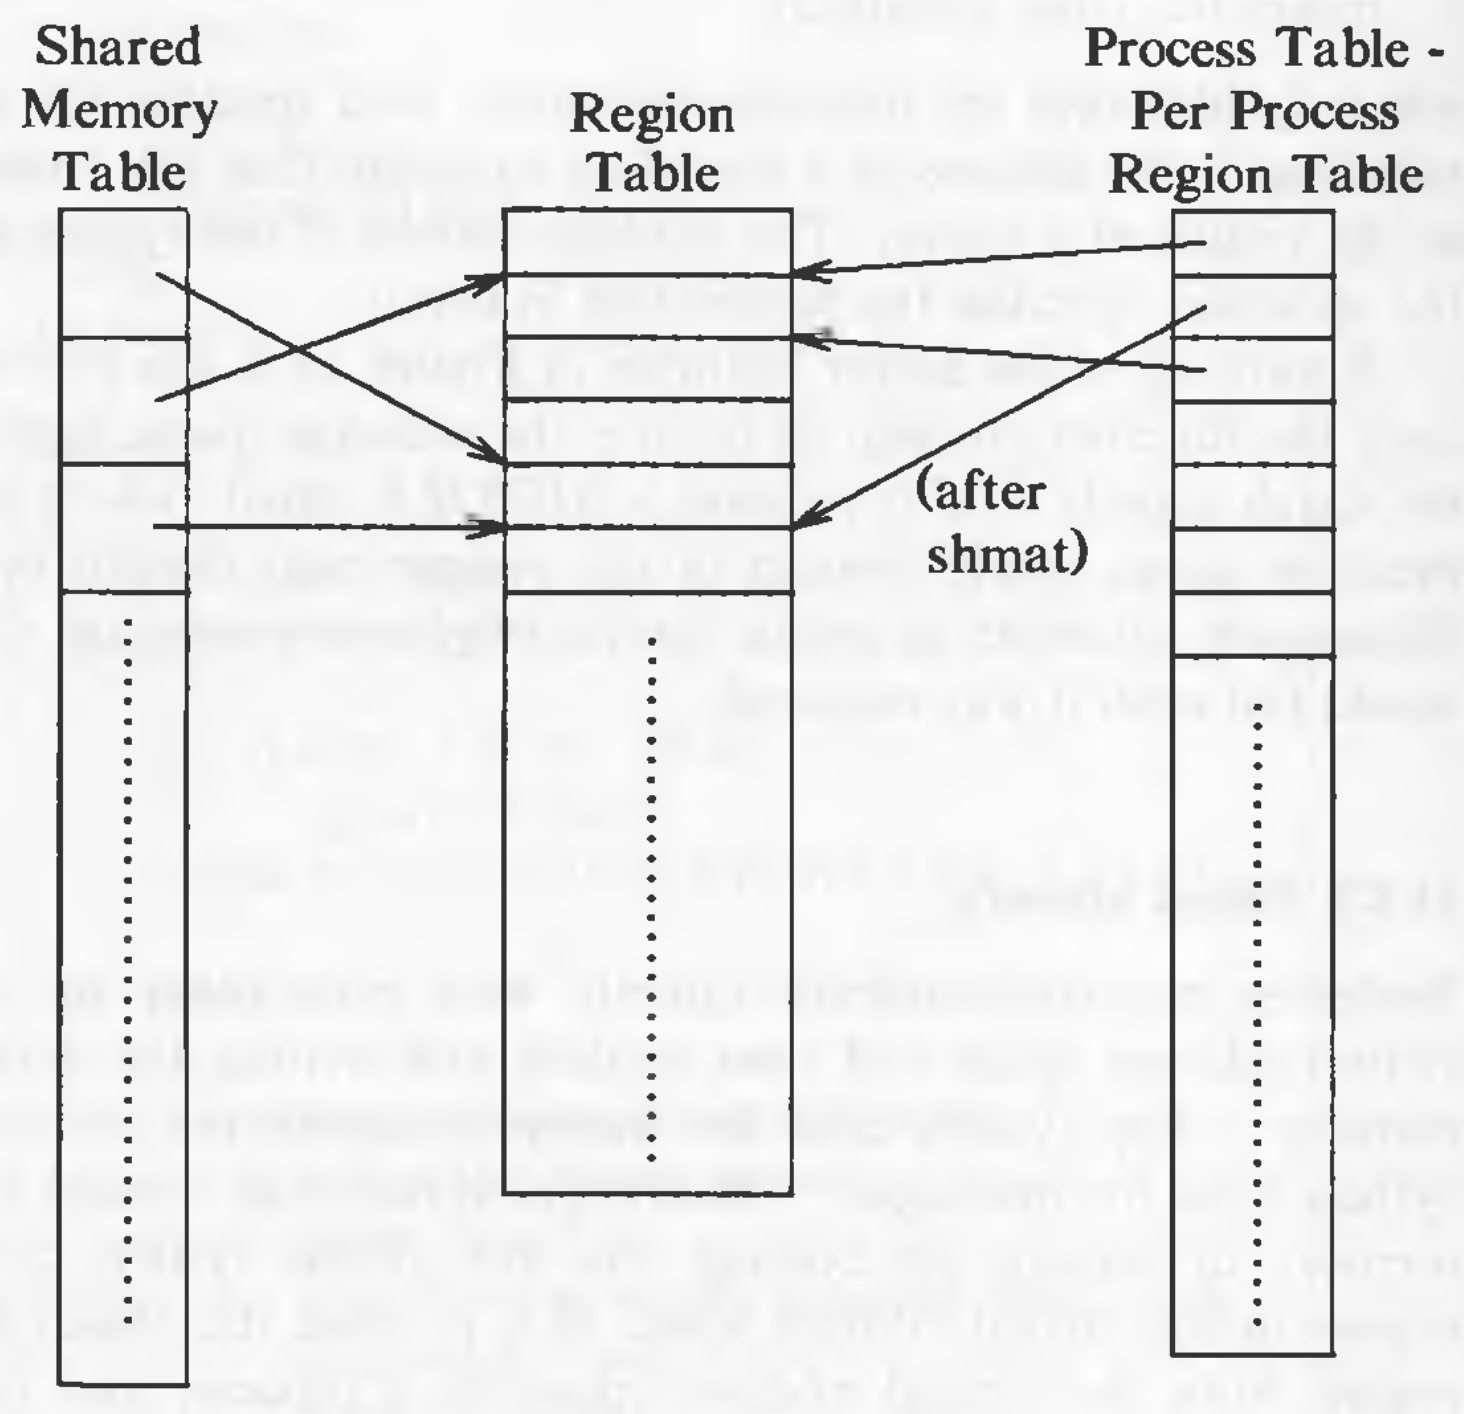 Data structures for shared memory